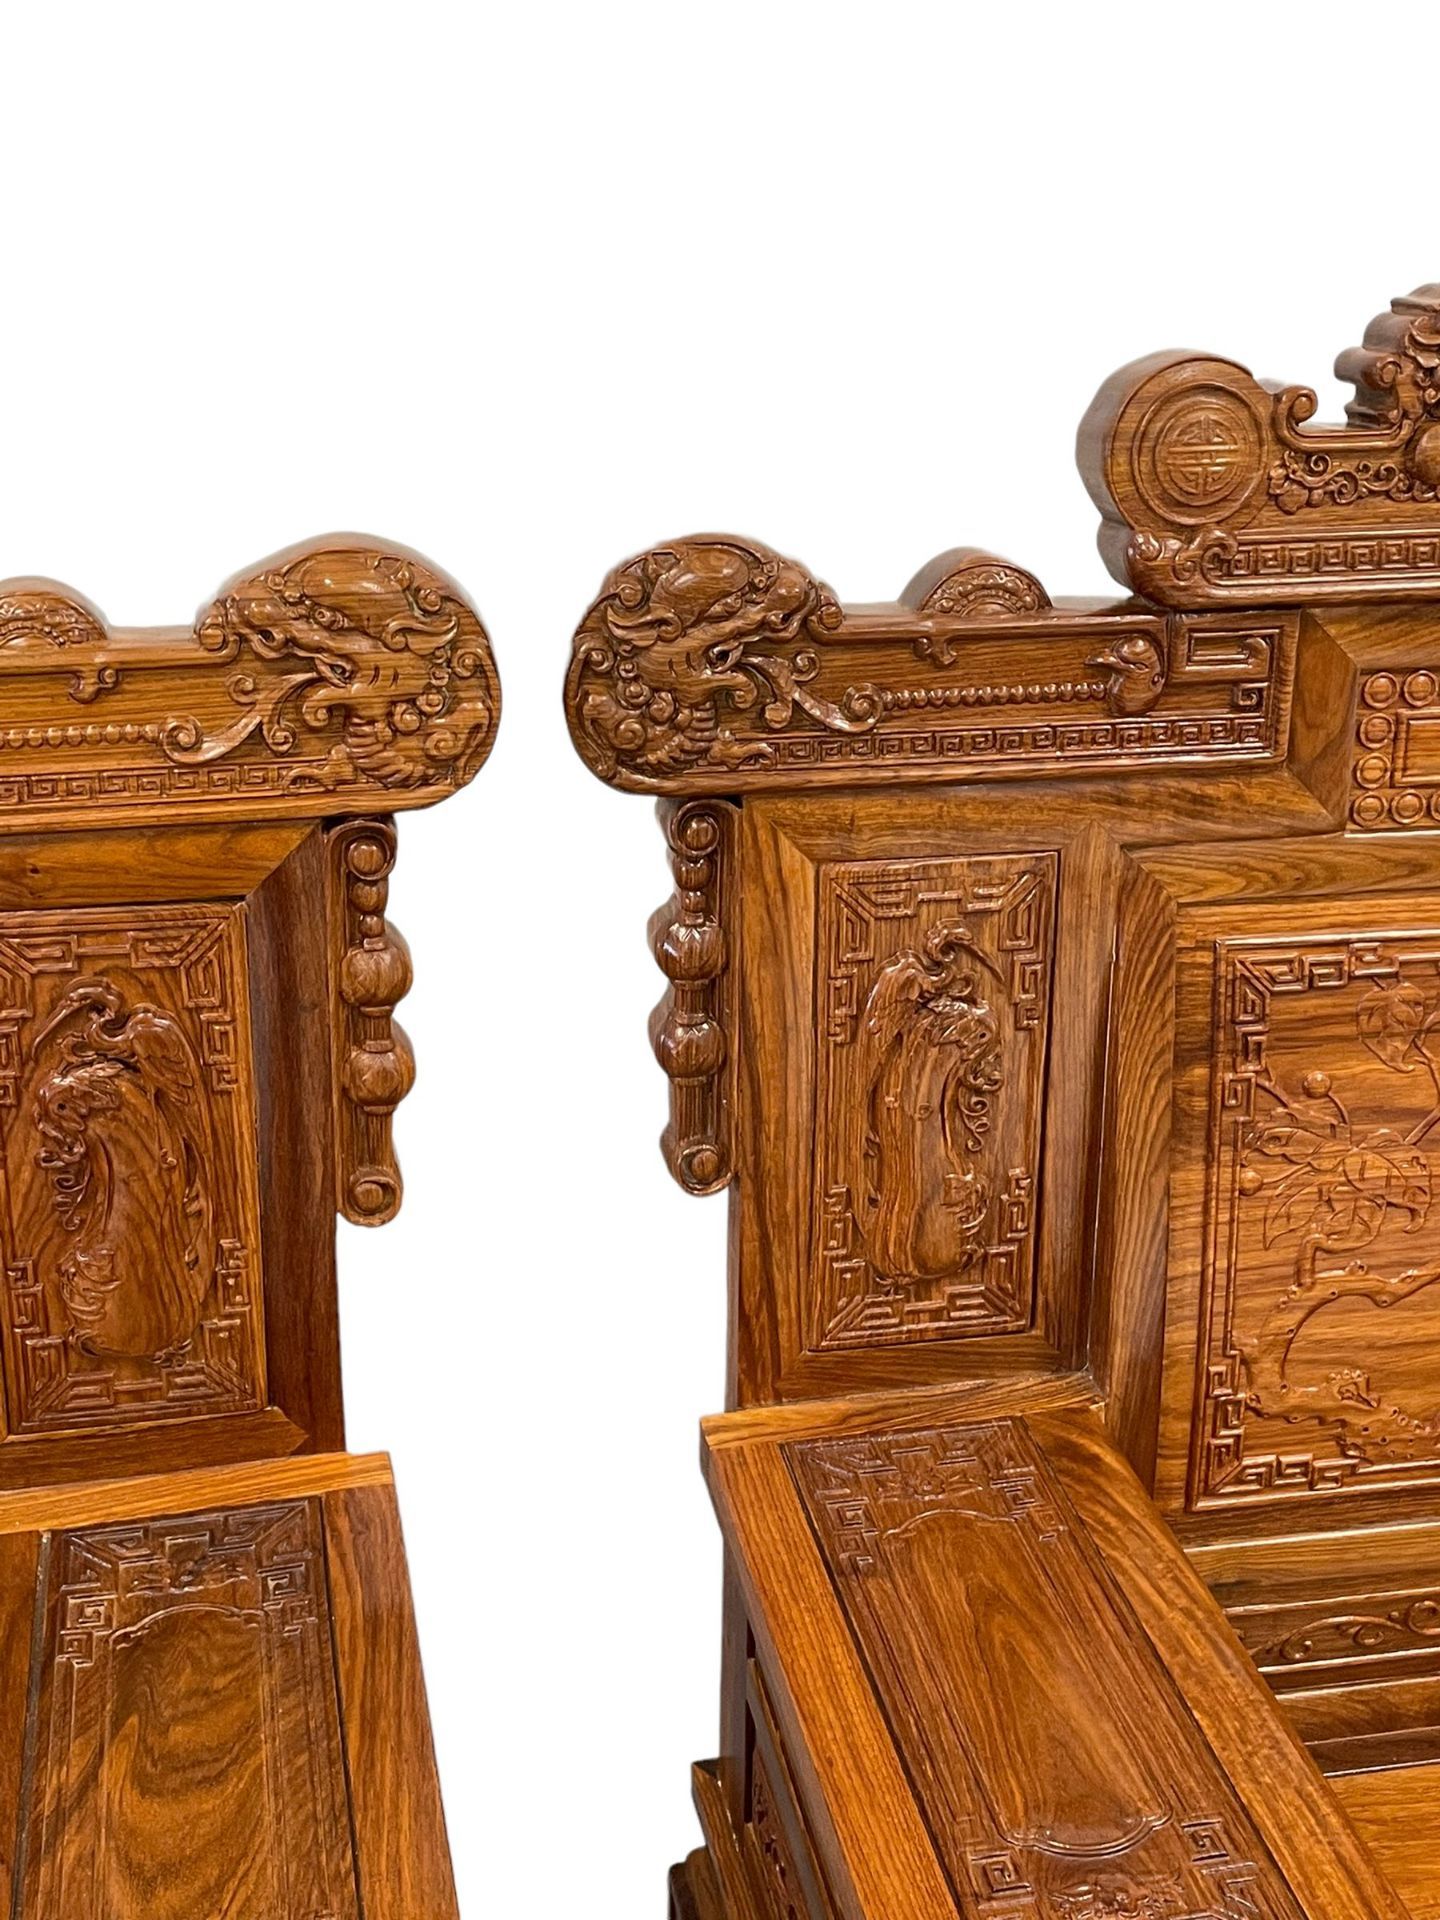 A Pair Chinese Imperial Style Hardwood Throne Chairs, The Backs Carved With Dragon Masks And Birds - Image 15 of 20